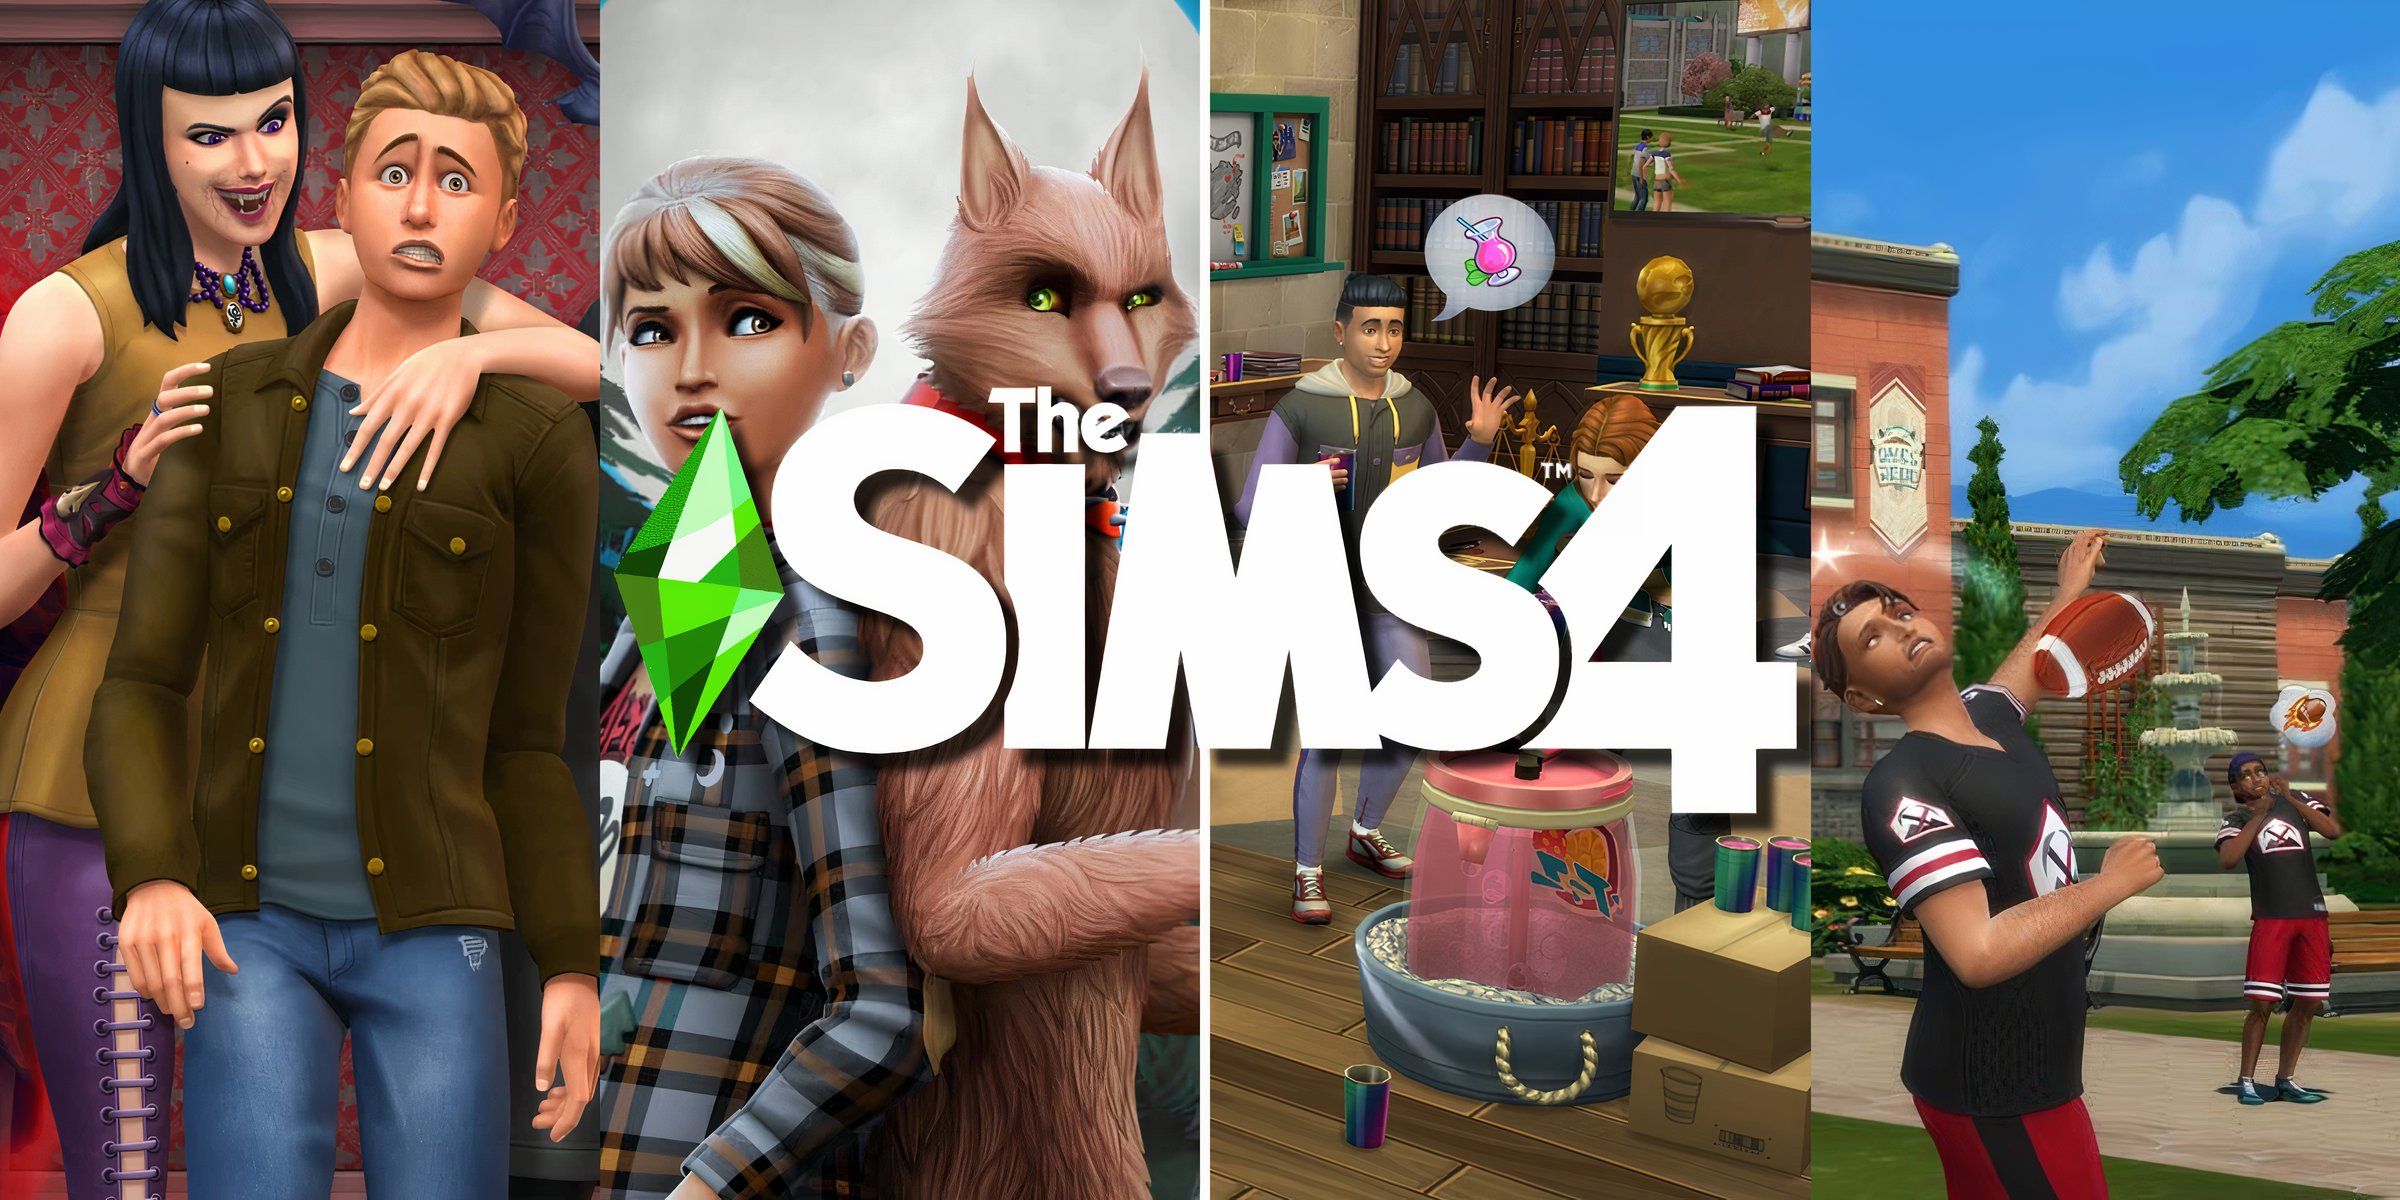 Sims art representing packs that work well together